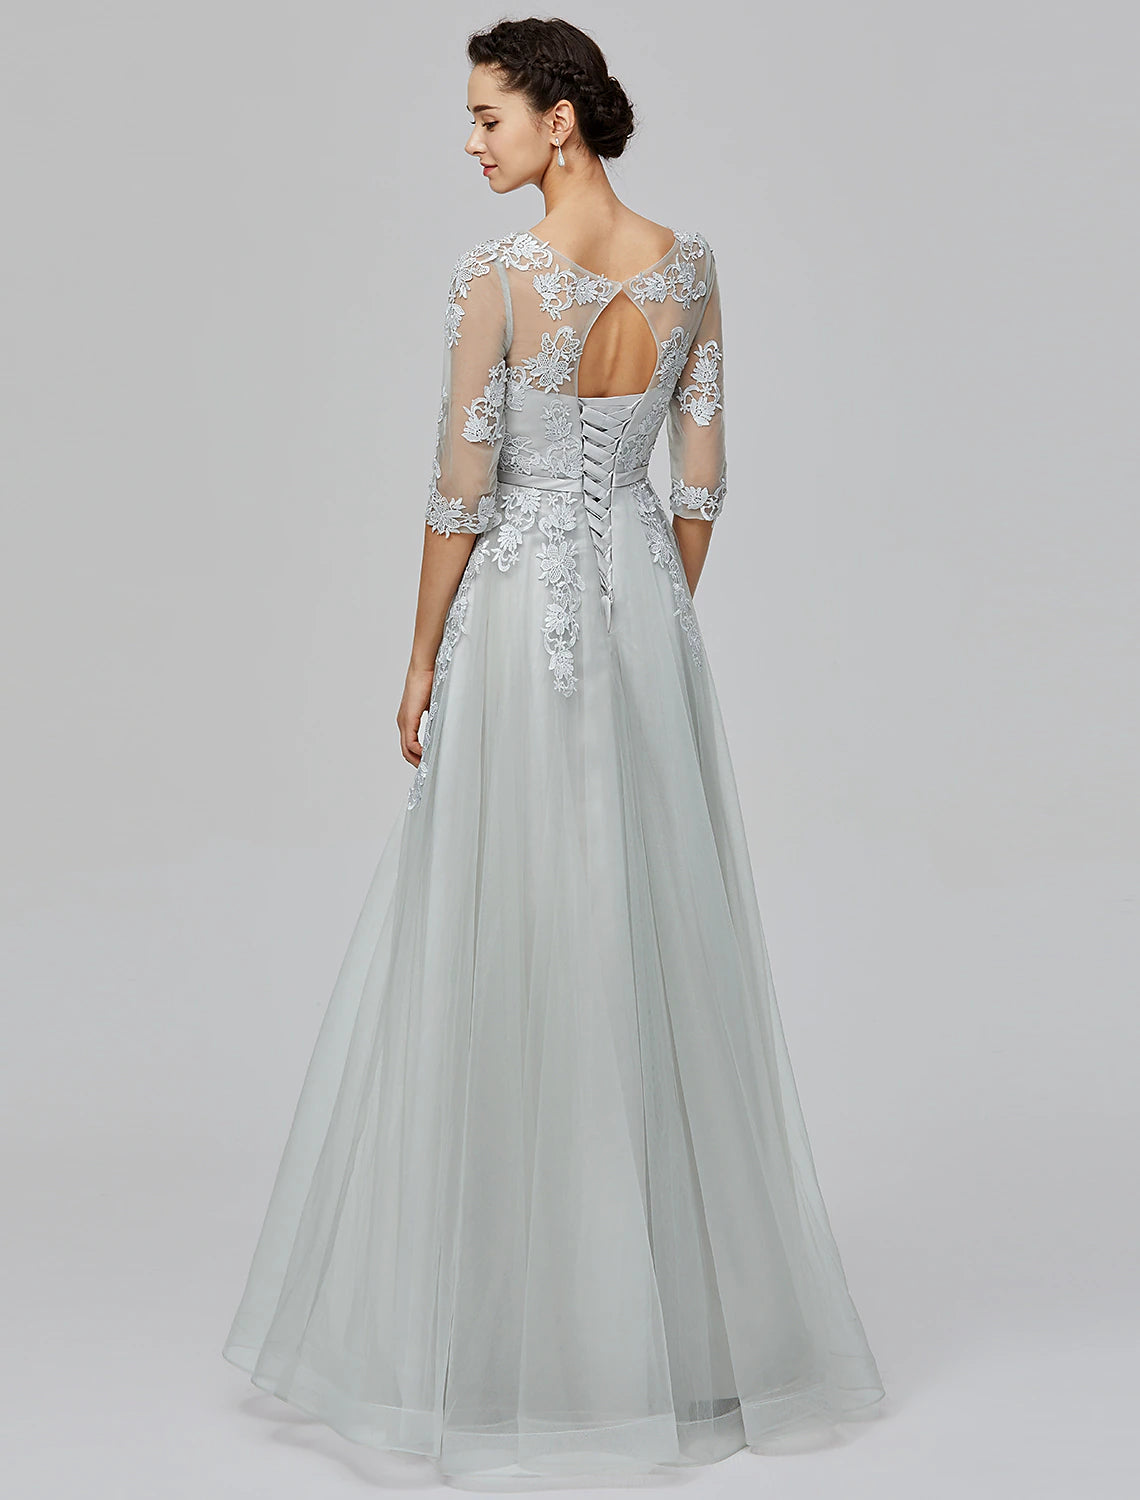 A-Line Empire Dress Wedding Guest Prom Floor Length Half Sleeve Illusion Neck Tulle with Bow(s) Appliques